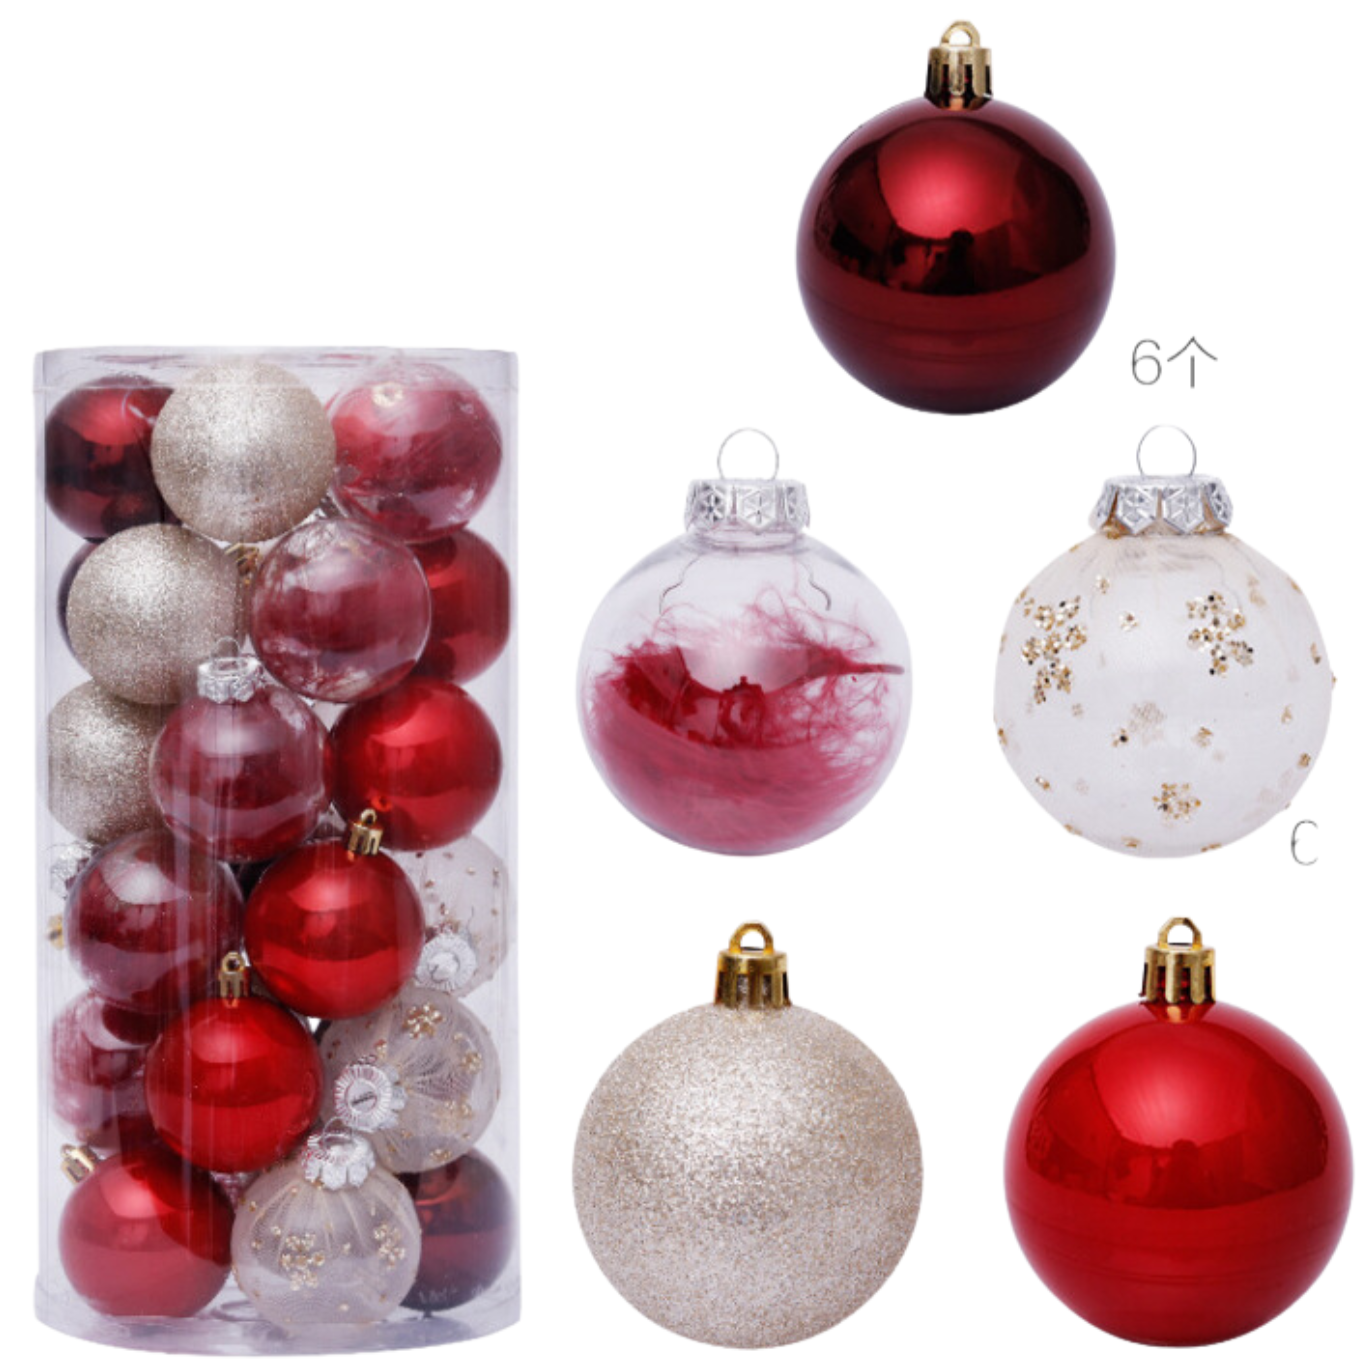 30 pcs pack of Luxury Baubles (6cm) Red And White